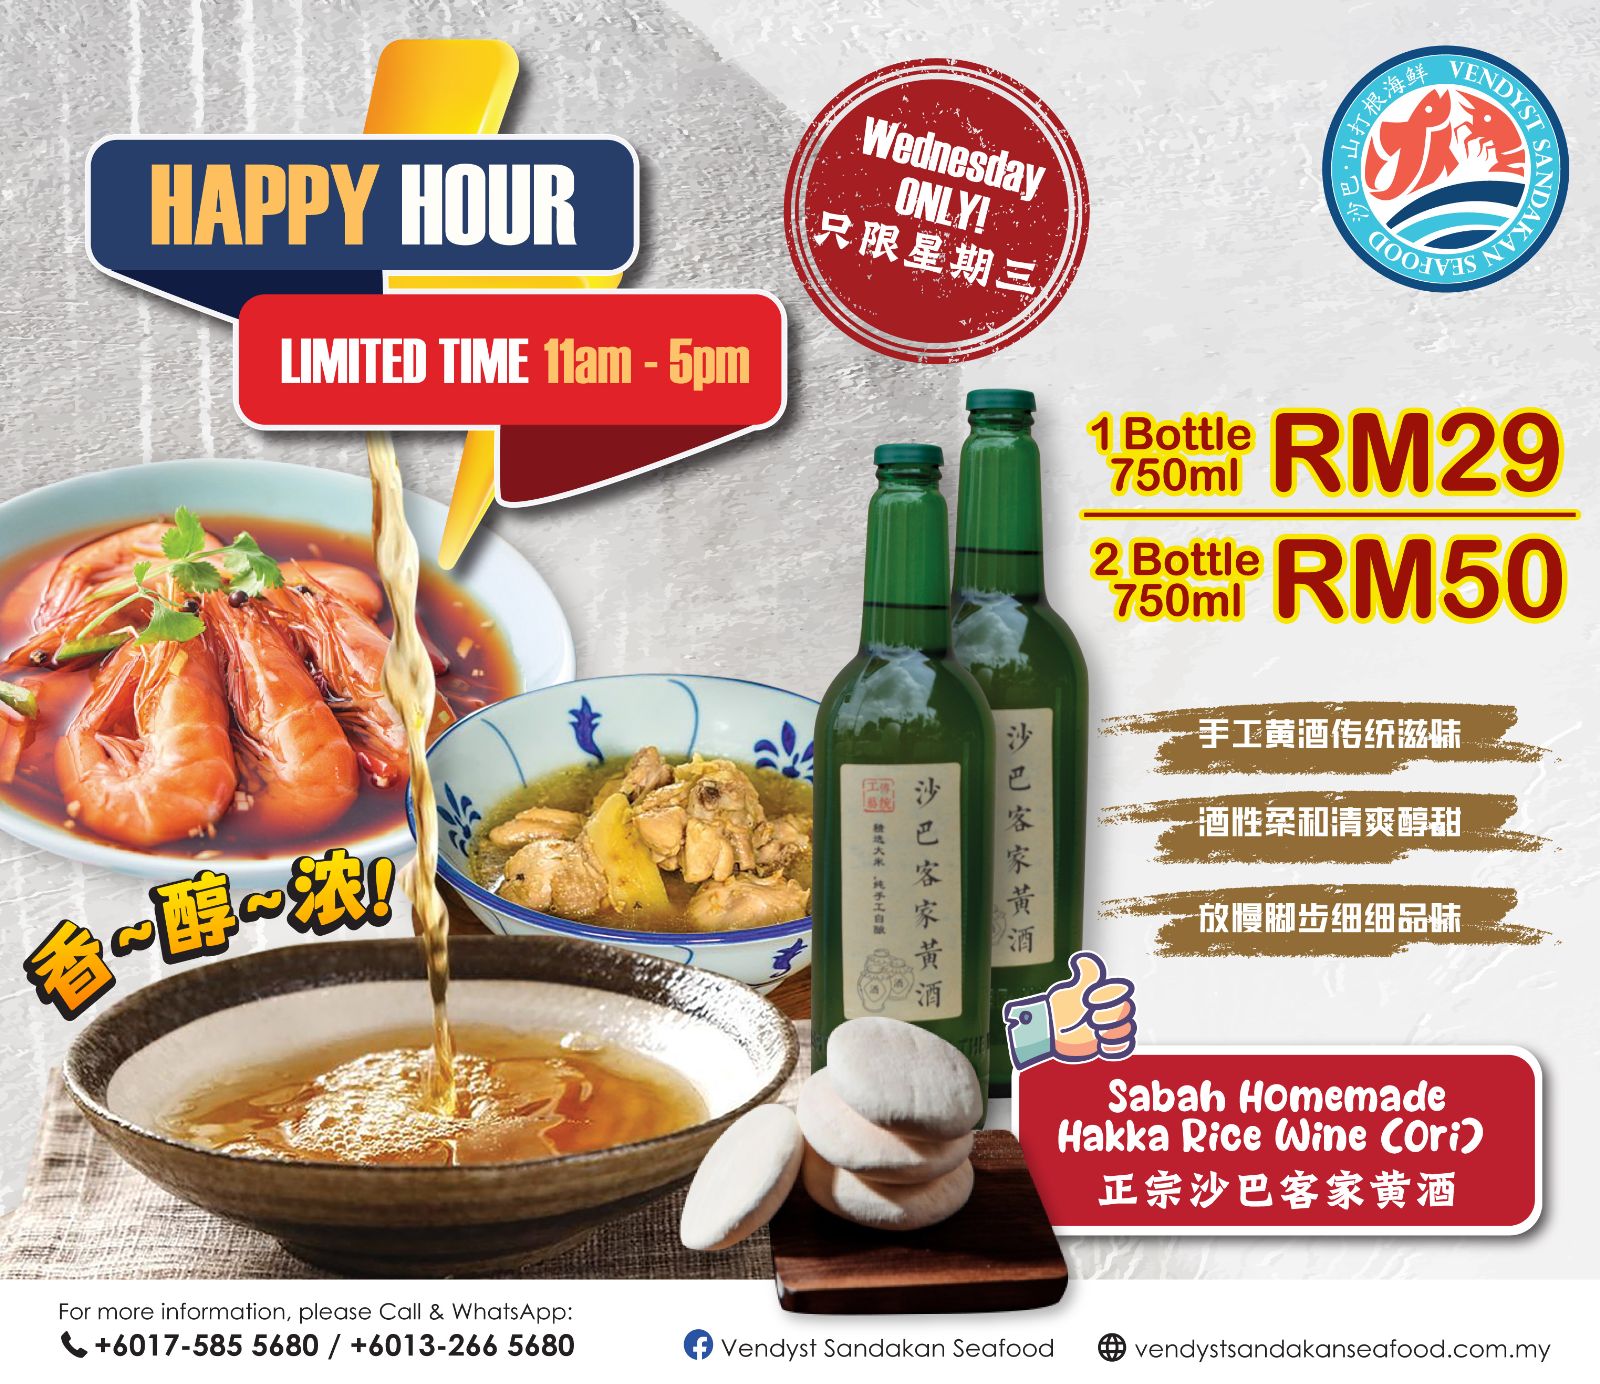 Wednesday Vendyst Happy Hour Offer~~